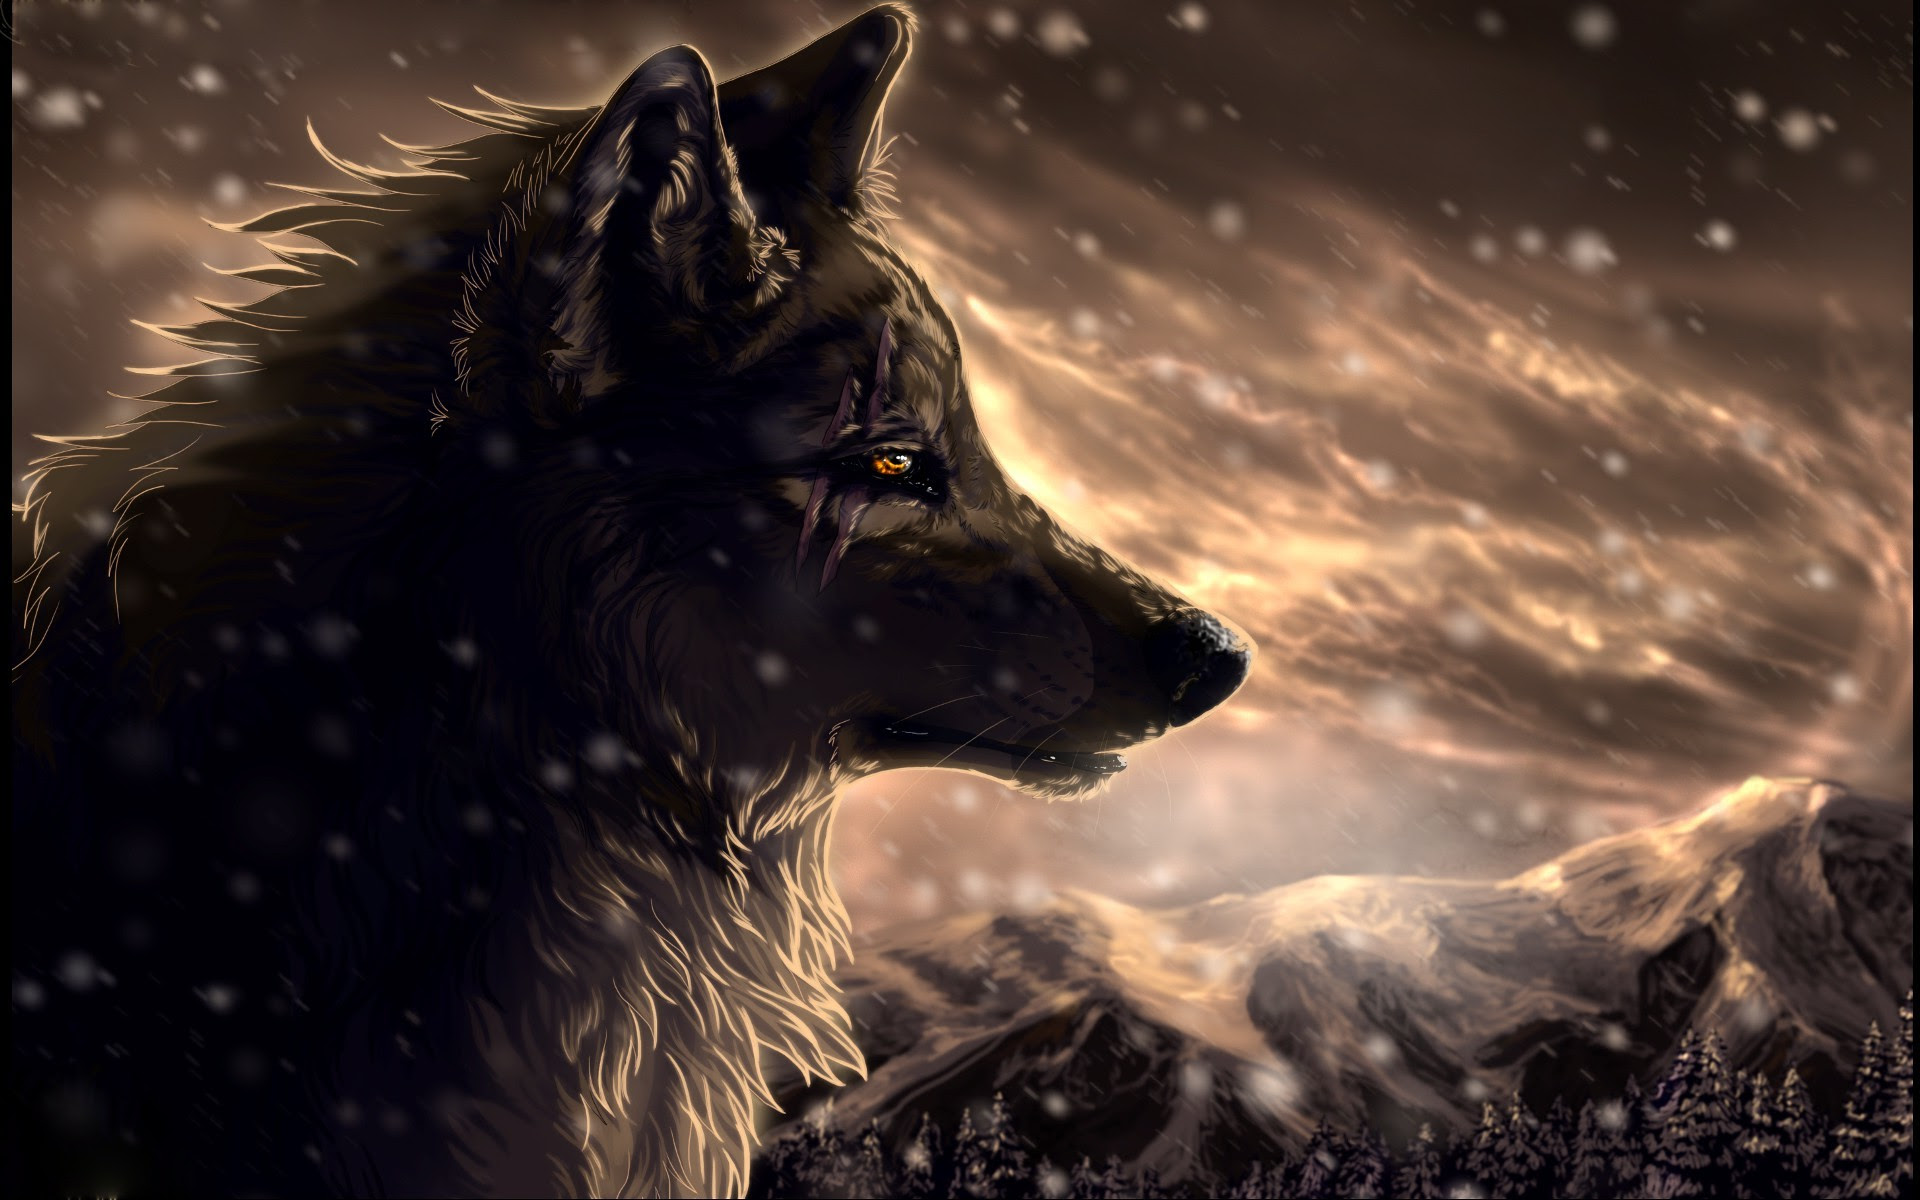 re looking for the best anime wolf wallpaper then wallpapertag is the place to be 24+  Wolf